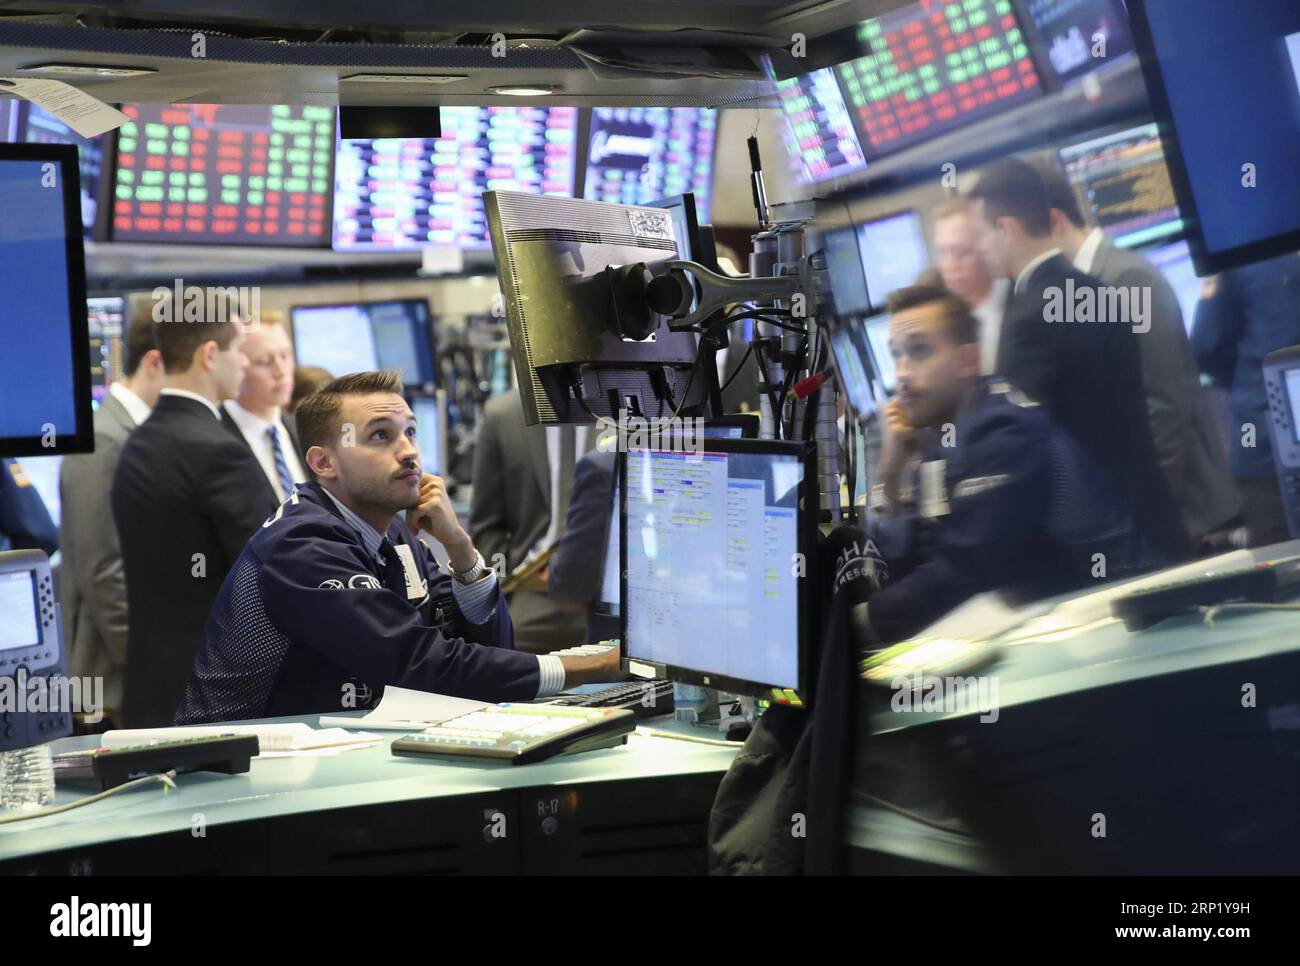 (180806) -- NEW YORK, Aug. 6, 2018 -- Traders work at the New York Stock Exchange in New York, the United States, Aug. 6, 2018. U.S. stocks closed higher on Monday as investors digested a batch of second-quarter corporate earnings reports. The Dow Jones Industrial Average rose 39.60 points, or 0.16 percent, to 25,502.18. The S&P 500 increased 10.05 points, or 0.35 percent, to 2,850.40. The Nasdaq Composite Index rose 47.66 points, or 0.61 percent, to 7,859.68. ) U.S.-NEW YORK-STOCKS WangxYing PUBLICATIONxNOTxINxCHN Stock Photo